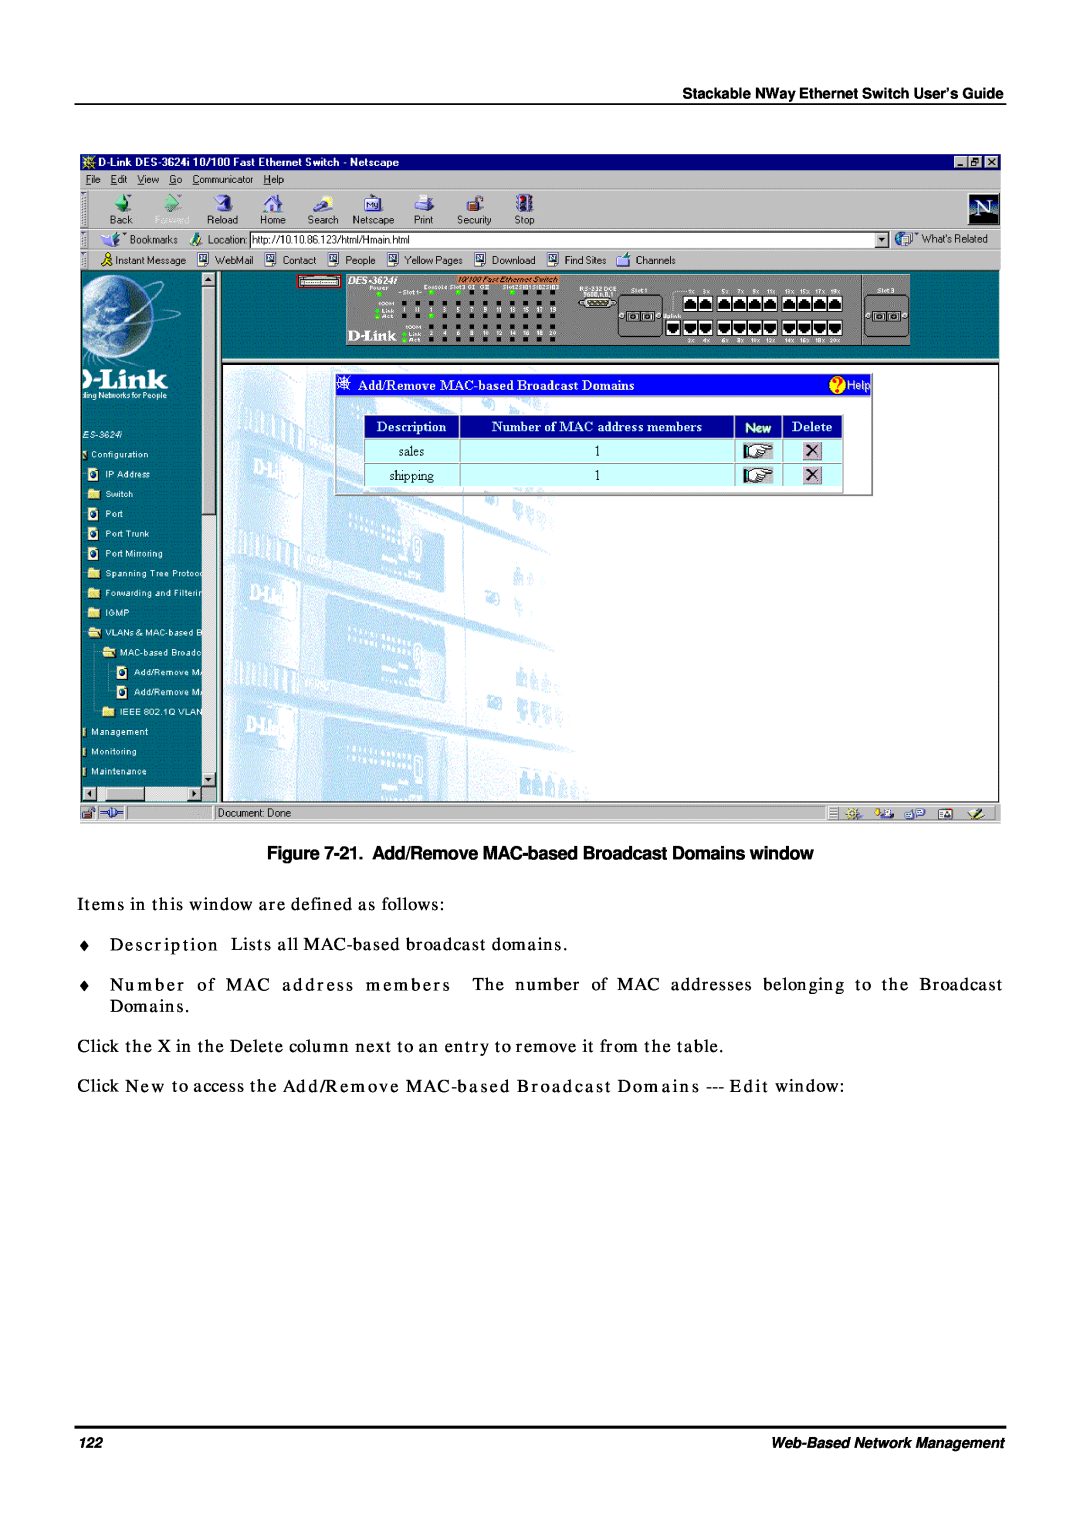 D-Link DES-3624 manual 21. Add/Remove MAC-based Broadcast Domains window 